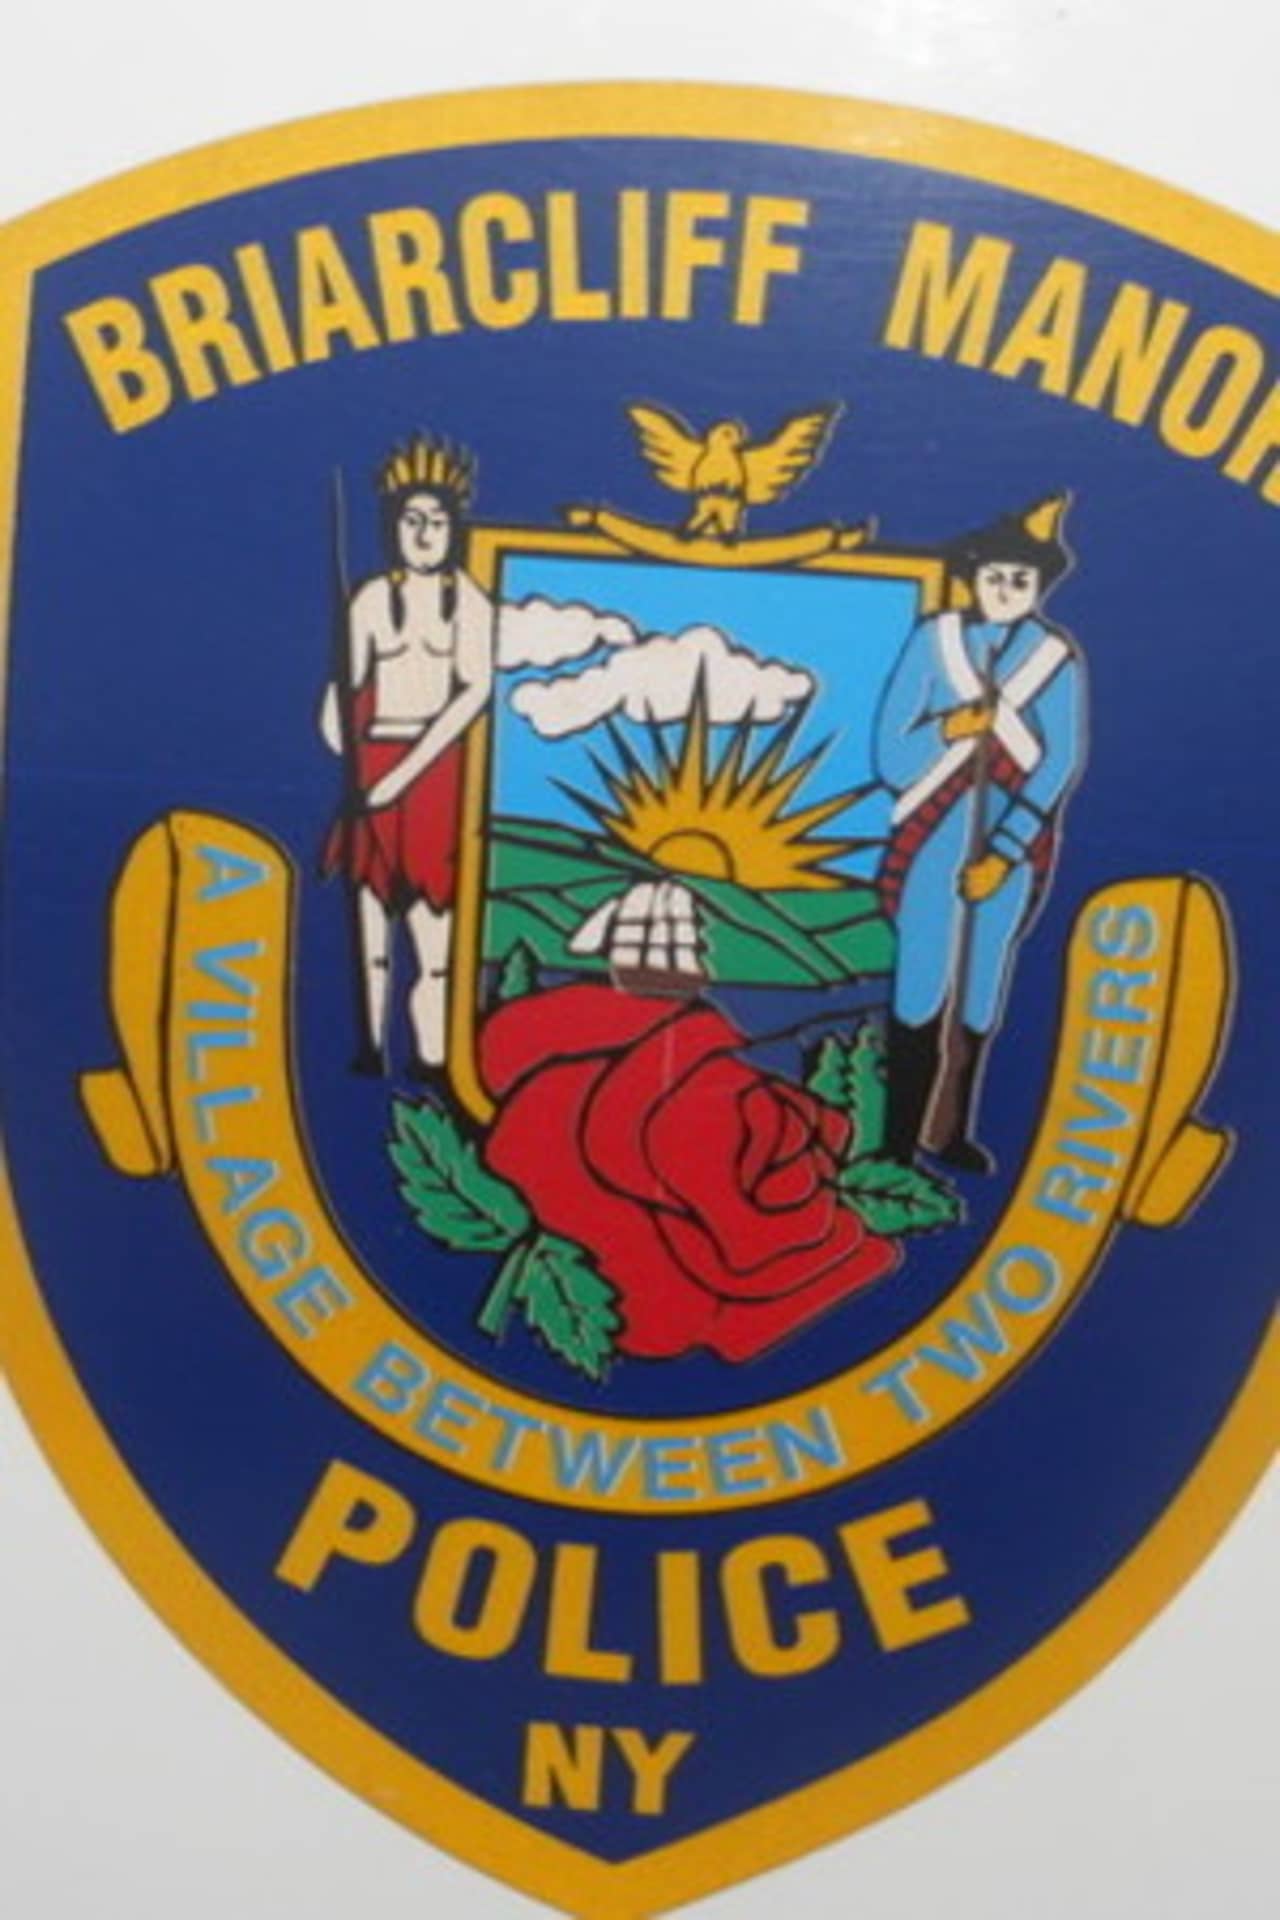 Briarcliff Manor Police said items were reportedly stolen from the garage of a home on Briarbrook Drive this week.